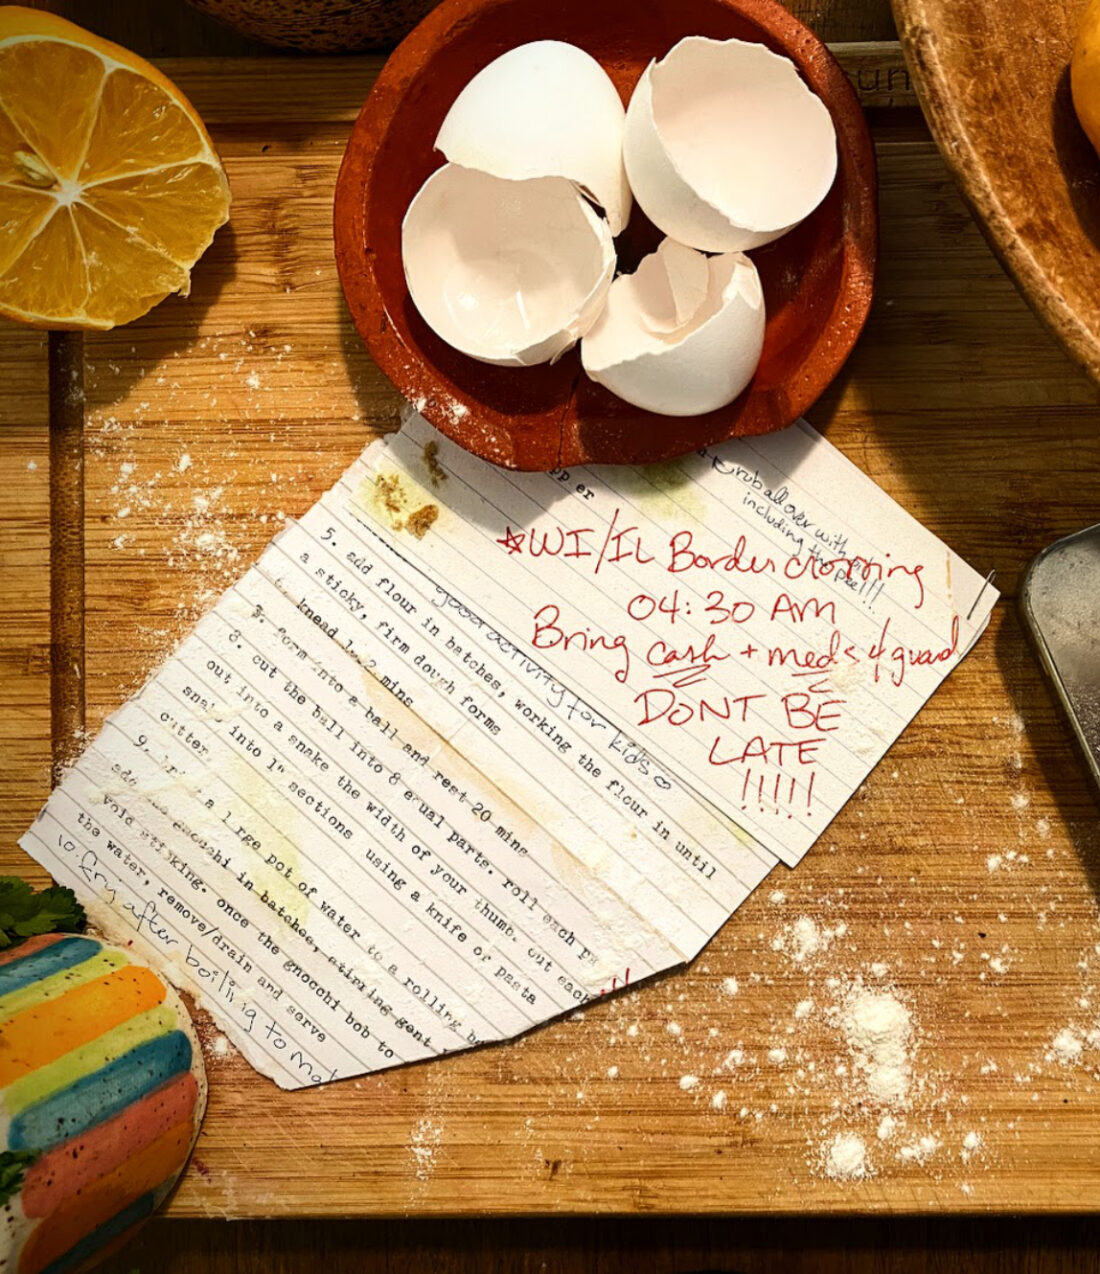 A recipe card, typewritten on an index card, stapled to a torn sheet of notebook paper with a typewritten recipe on it. Both are weathered, torn, stained, and annotated. The card is on top of a hefty wooden cutting board, and is surrounded by a bowl of lemons, a dish of eggshells, a cut lemon, a repurposed breath mints tin containing mixed pills including estrogen/estradiol and antidepressants, and scattered flour. Much of the recipe card is obscured by the eggshells. 

Visible recipe text is as follows (all is typewritten unless otherwise indicated; see story text for recipe in full): 

On the recipe card: a handwritten note reading ‘rub all over with oil including the peel!!!’ is overlapped by a handwritten note in different handwriting, in red marker, which reads: “WI / IL border crossing 04:30 AM Bring CASH and MEDS 4 guard don’t be late!!!!!!!”
The index card overlaps the recipe page. The recipe visible on the page is as follows:

5.	Add flour in batches, working the flour in until a sticky, firm dough forms. 
6.	Knead 1–2 mins
7.	Form into a ball and rest for 20 mins
8.	Cut the ball into 8 equal parts. Roll each part out into a snake the width of your thumb. Cut each snake into 1-inch sections using a knife or pasta cutter.
9.	[after this point, the recipe card is folded and obstructs part of each line.] Bring a large pot of water to a rolling b. Add the gnocchi in batches, stirring gent … void sticking. Once the gnocchi bob … the water, remove/drain and serve.
Partially obscured handwritten annotation reads: Fry after boiling to [text obscured]
